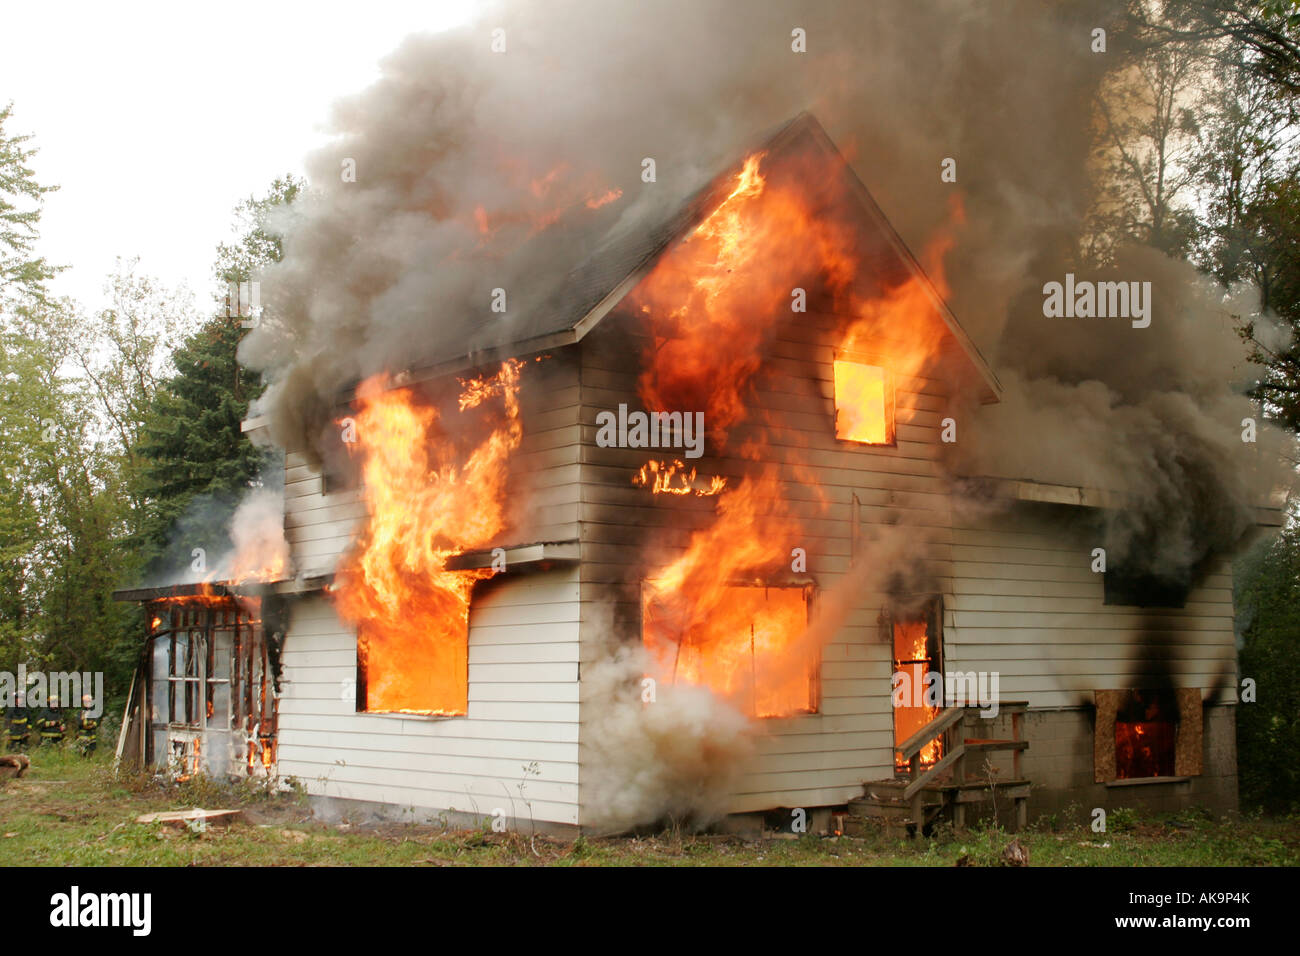 House on fire with flames coming out the windows Stock Photo - Alamy